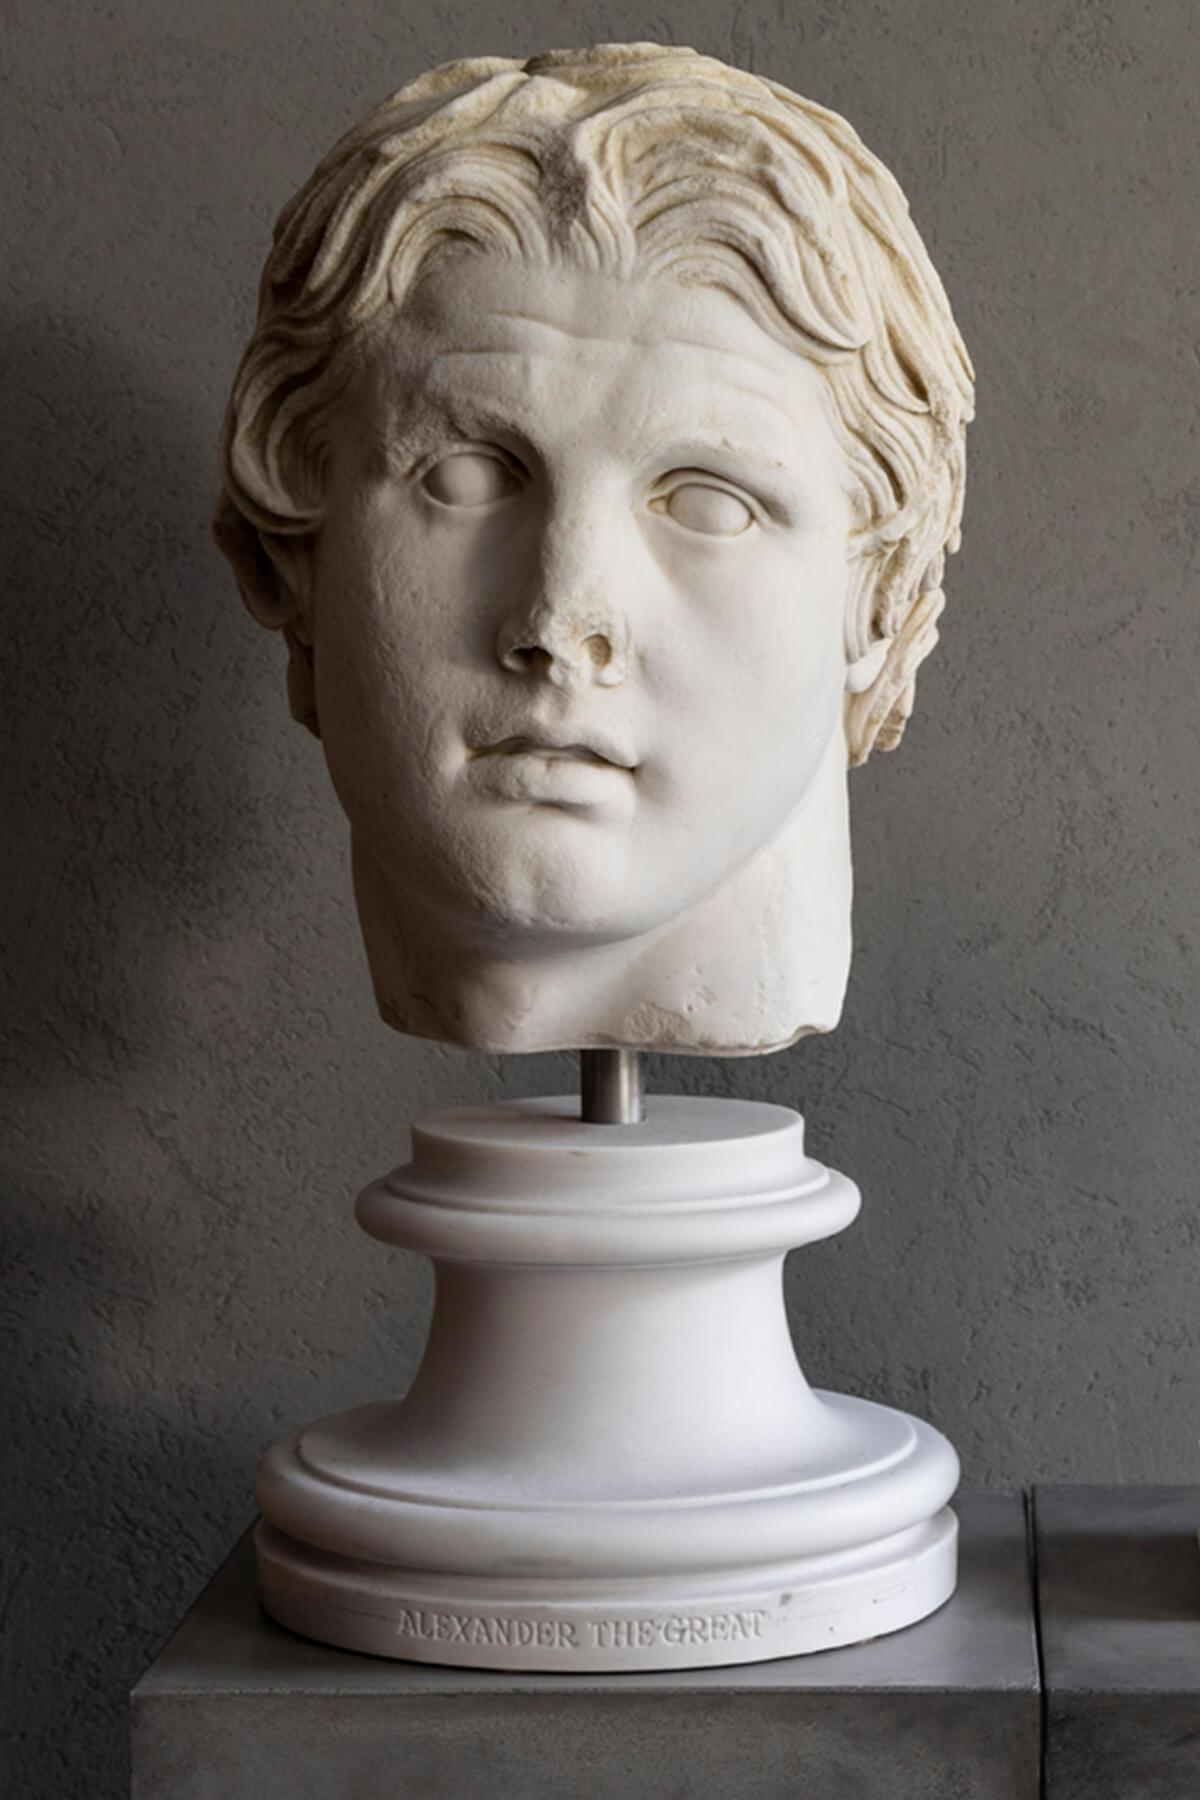 Height: 65 cm / Weight: 20 kg

Alexander, the real name of Macedonian III. Alexandros, commonly known as Alexander the Great, was king of the ancient Greek kingdom of Macedonia and a member of the Argead dynasty. He was born in Pella in 356 BC, and